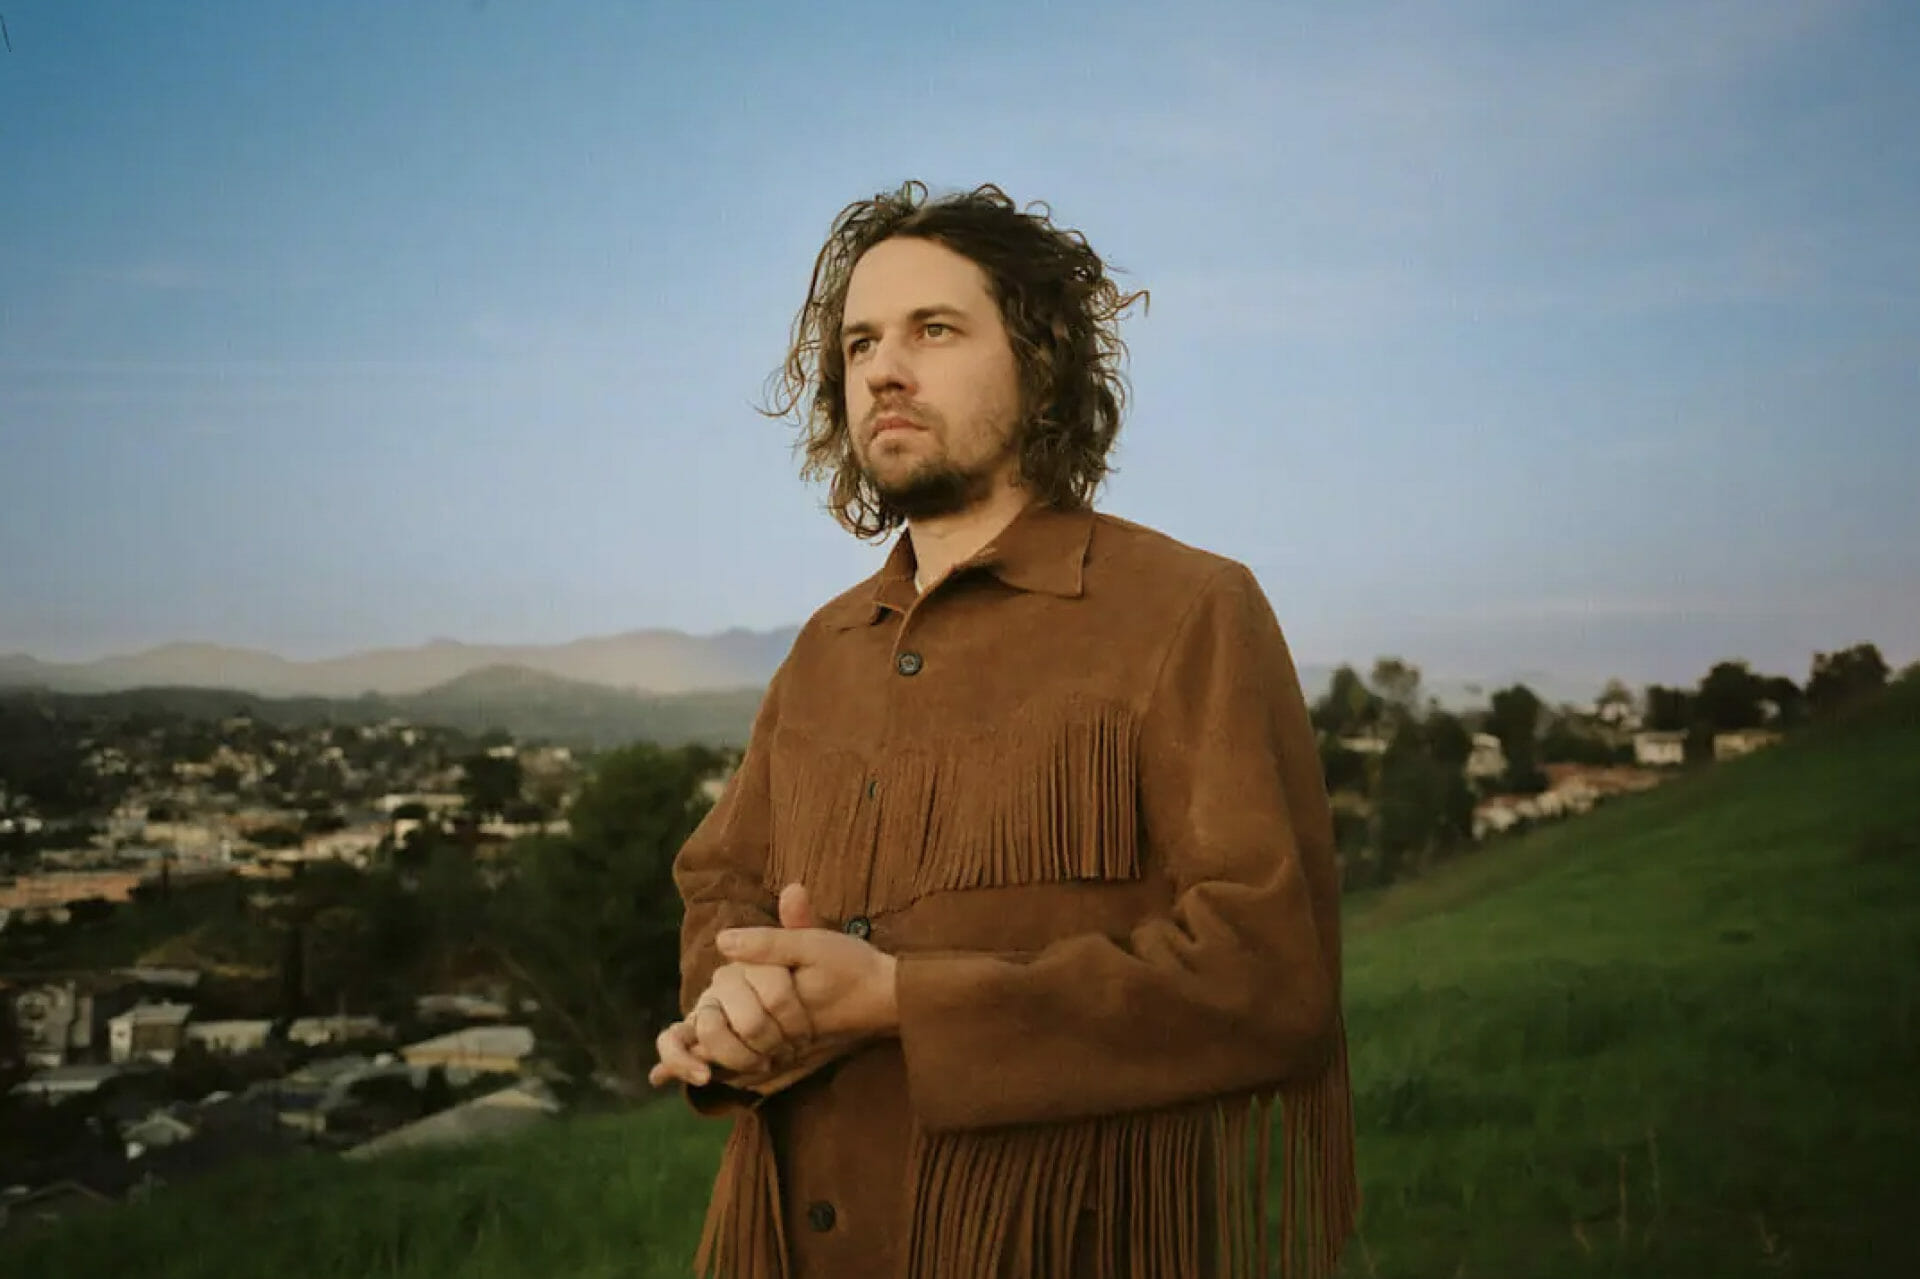 Watch: Kevin Morby Shares Video for “Bittersweet, TN,” with Erin Rae